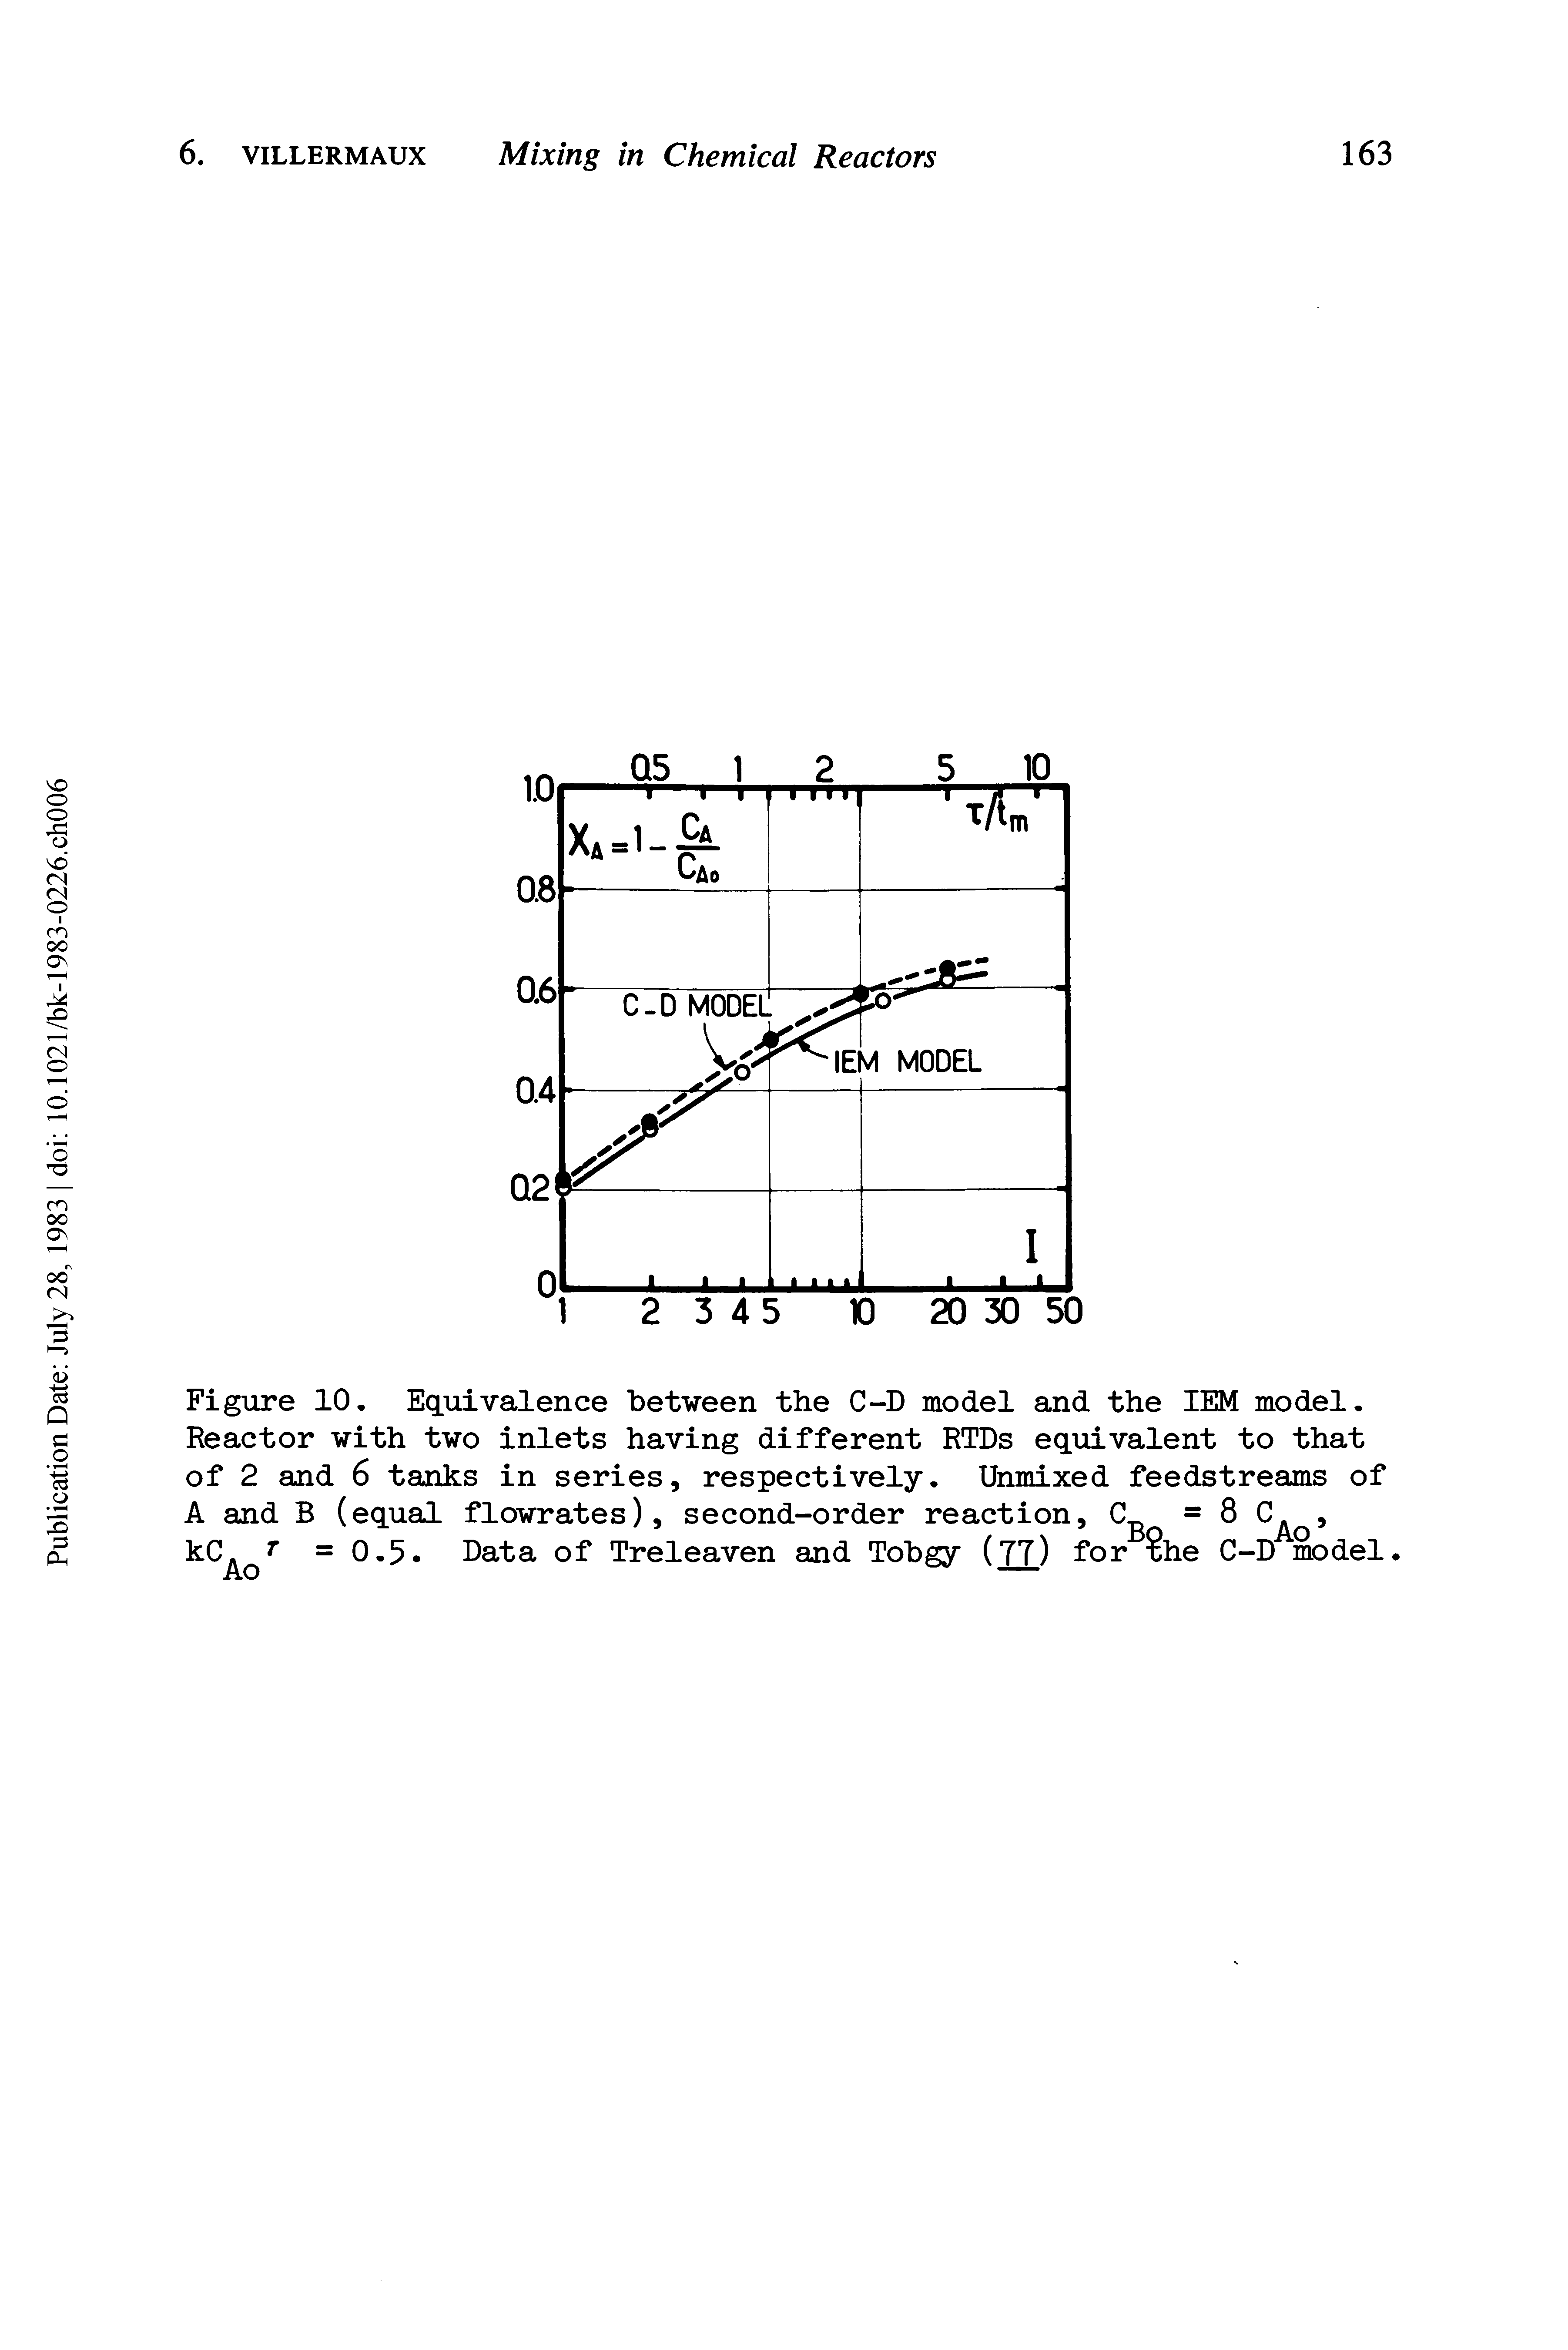 Figure 10, Equivalence between the C-D model and the IEM model. Reactor with two inlets having different RTDs equivalent to that of 2 and 6 tanks in series, respectively. Unmixed feedstreams of A and B (equal flowrates), second-order reaction, =8, ...